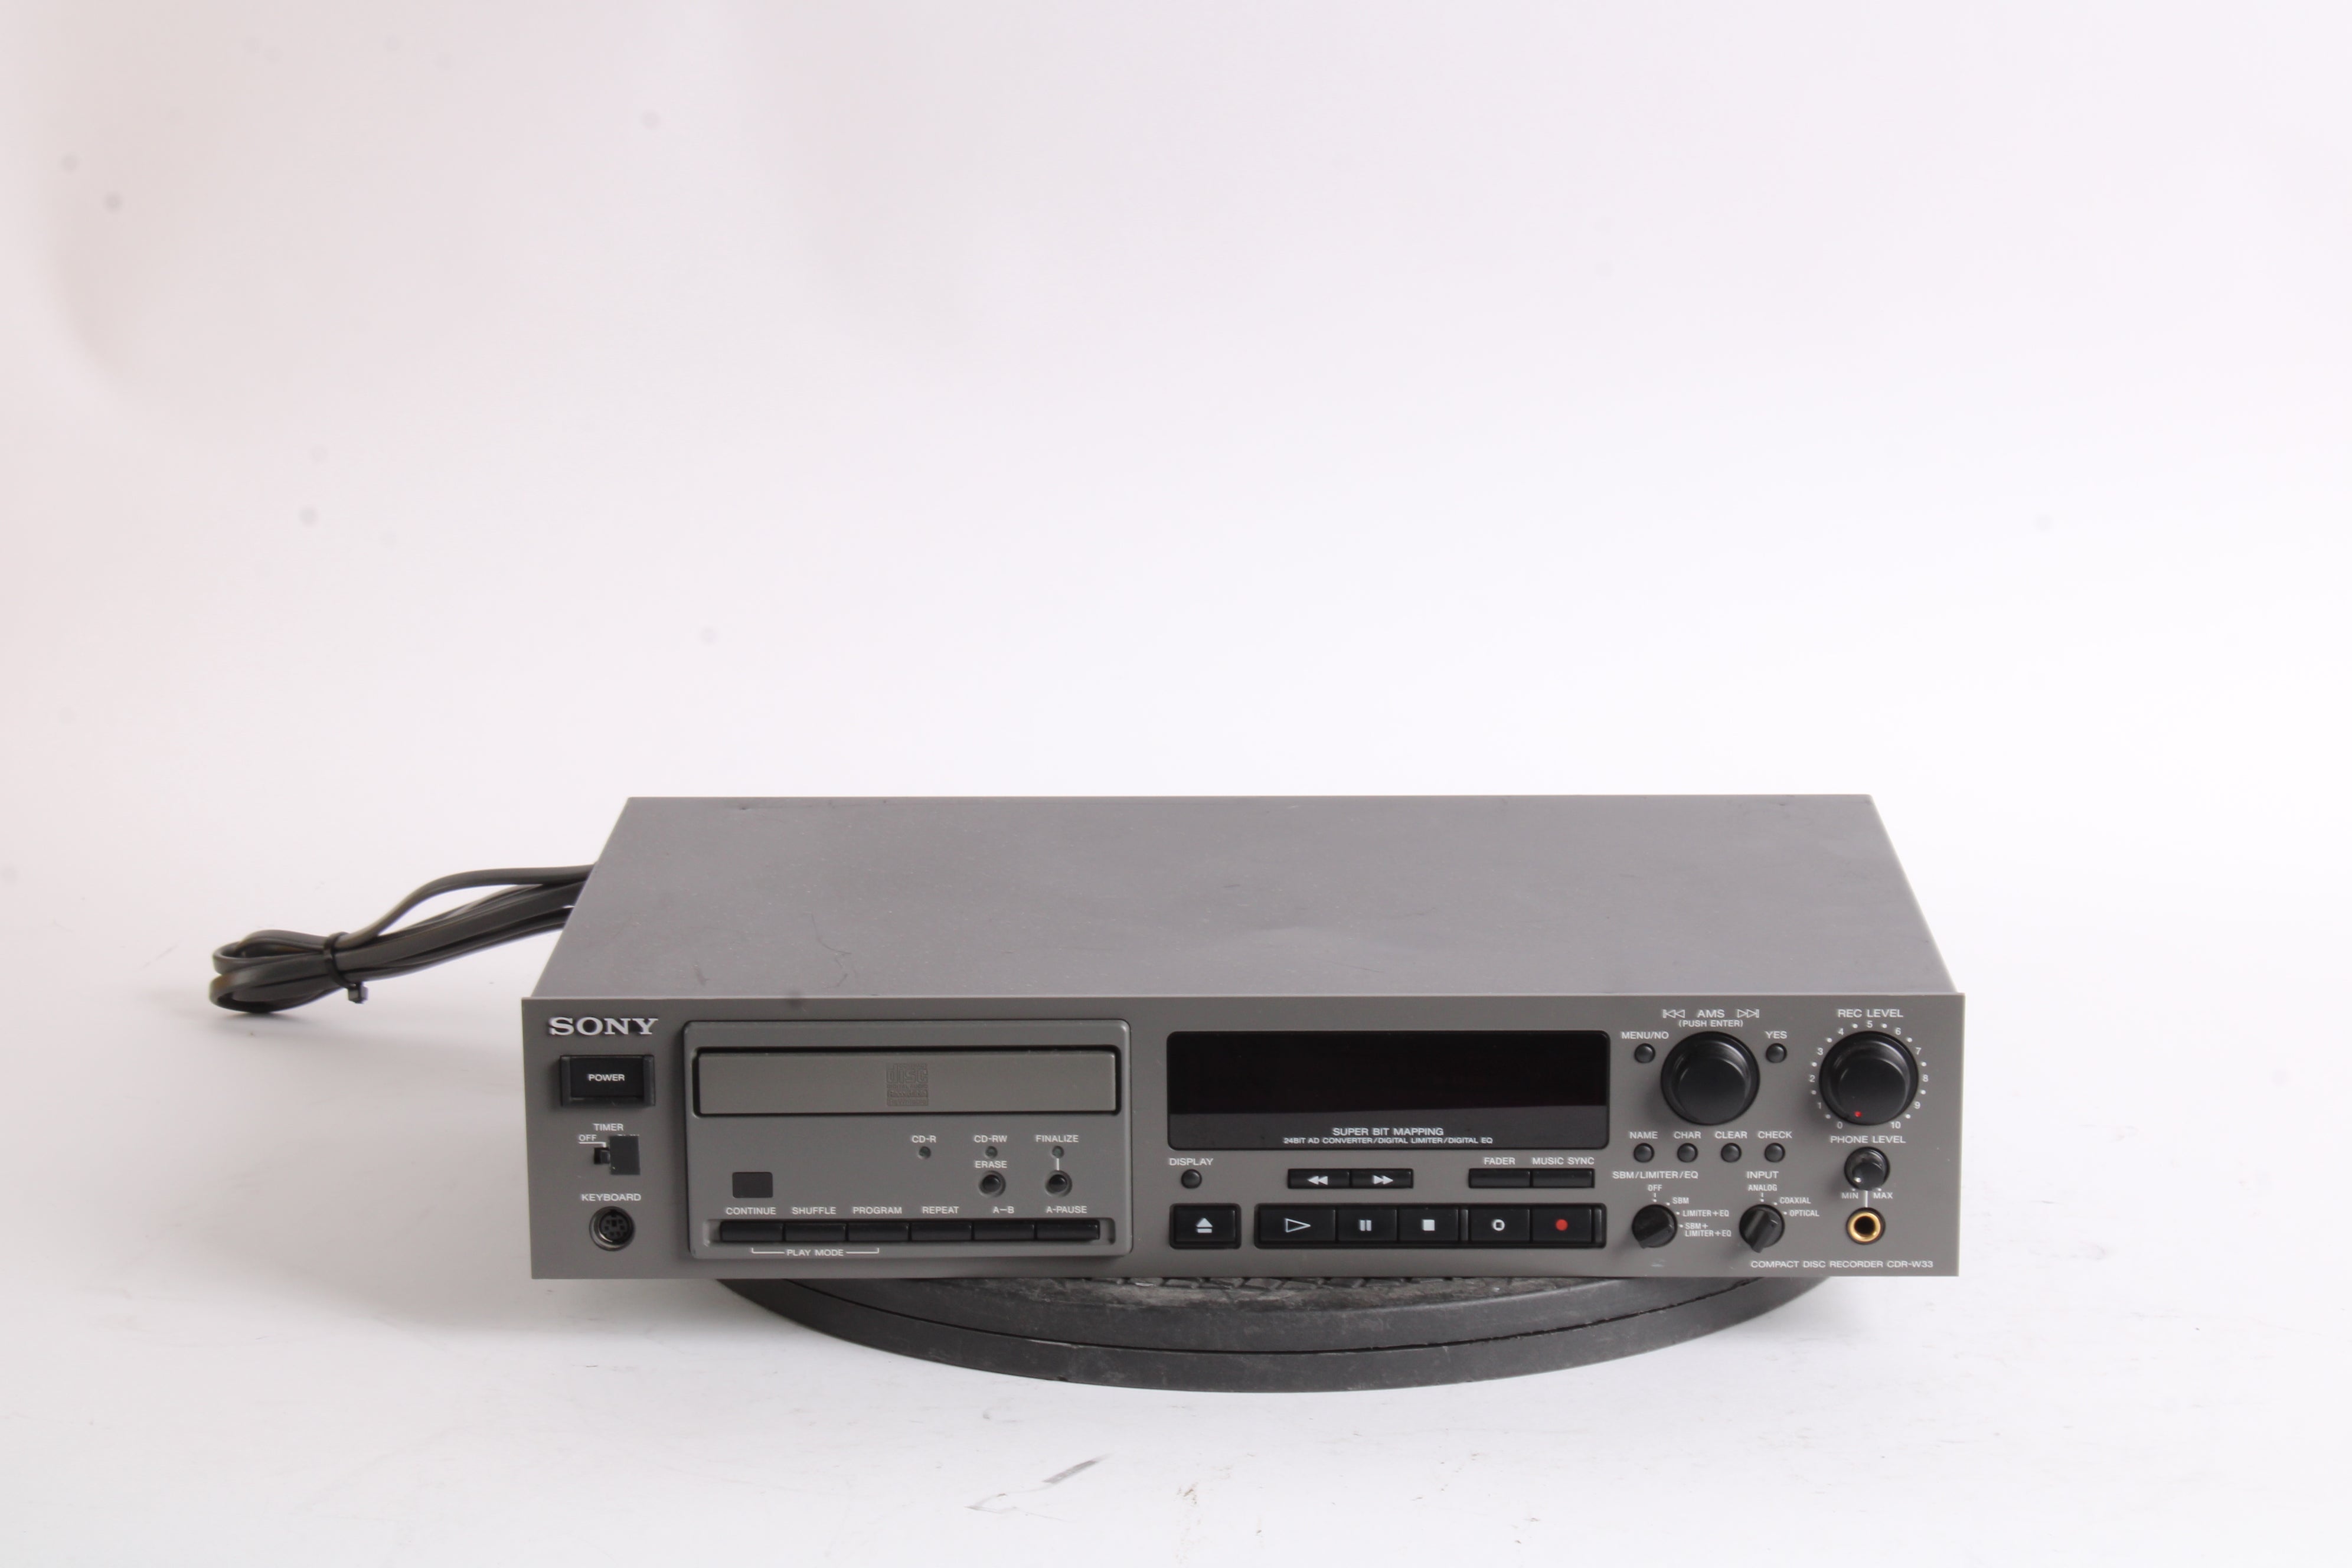 Sony CDR-W33 Compact Disc Recorder CD Player - AS IS Parts